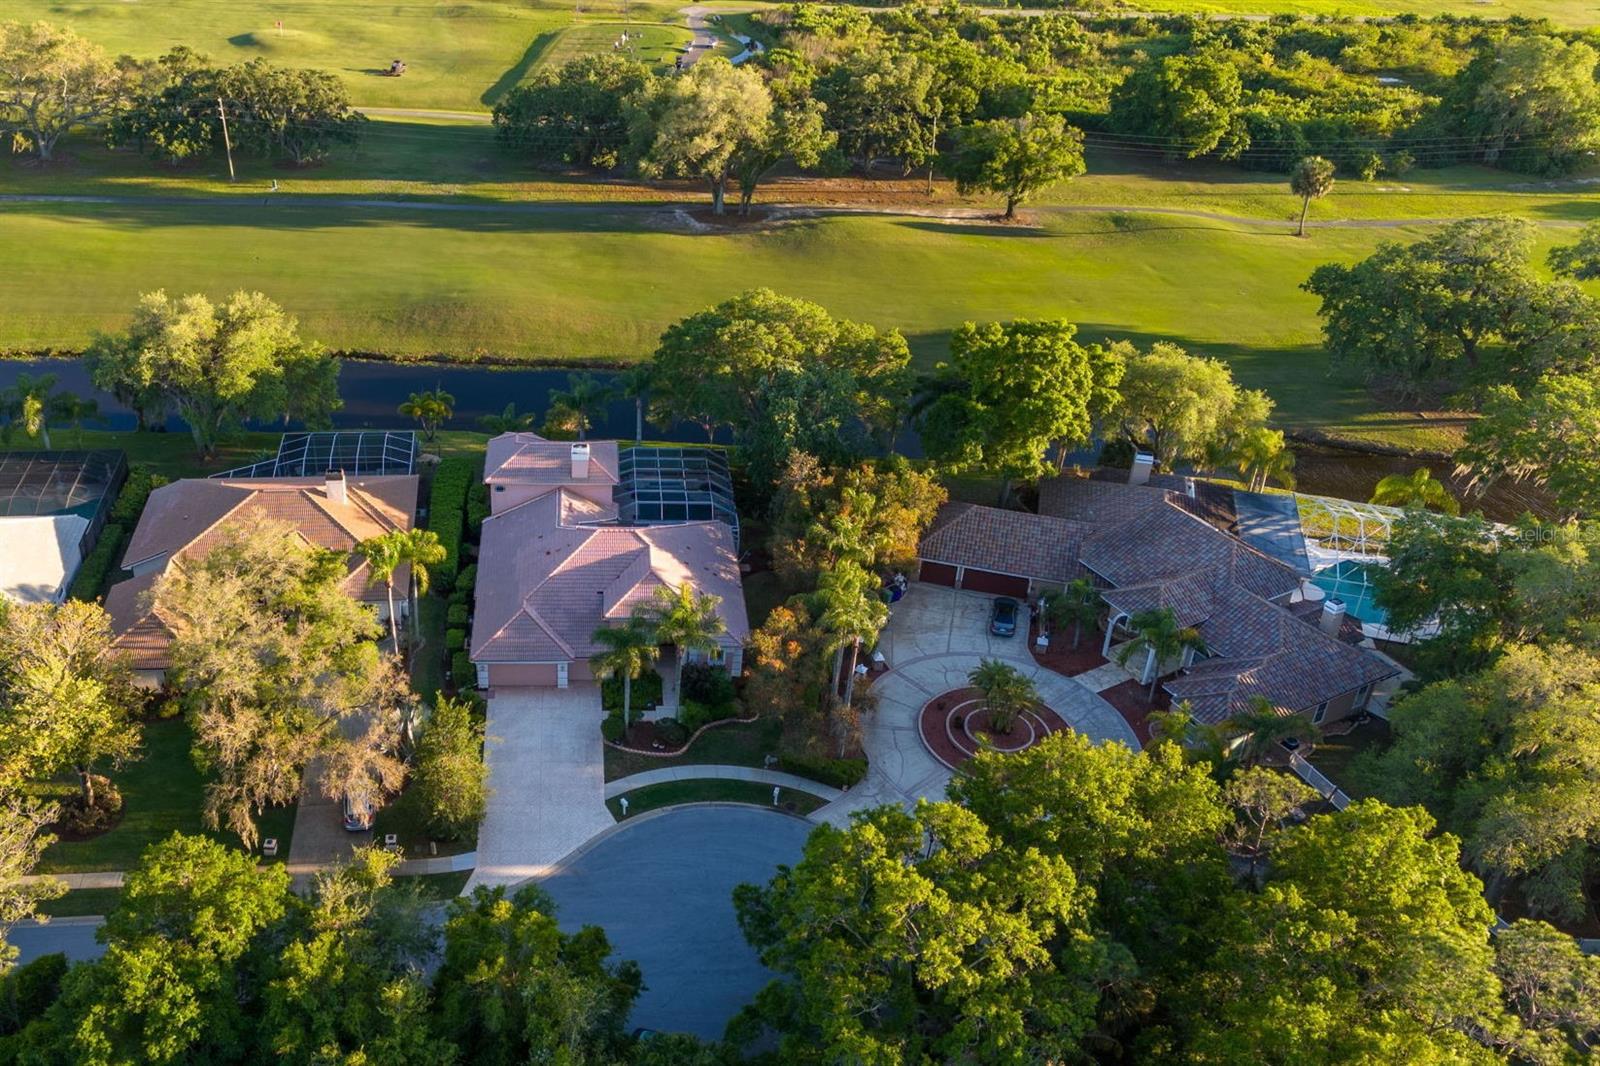 Aerial view of the front of the home with private cul-de-sac and pond between the homes and North golf course